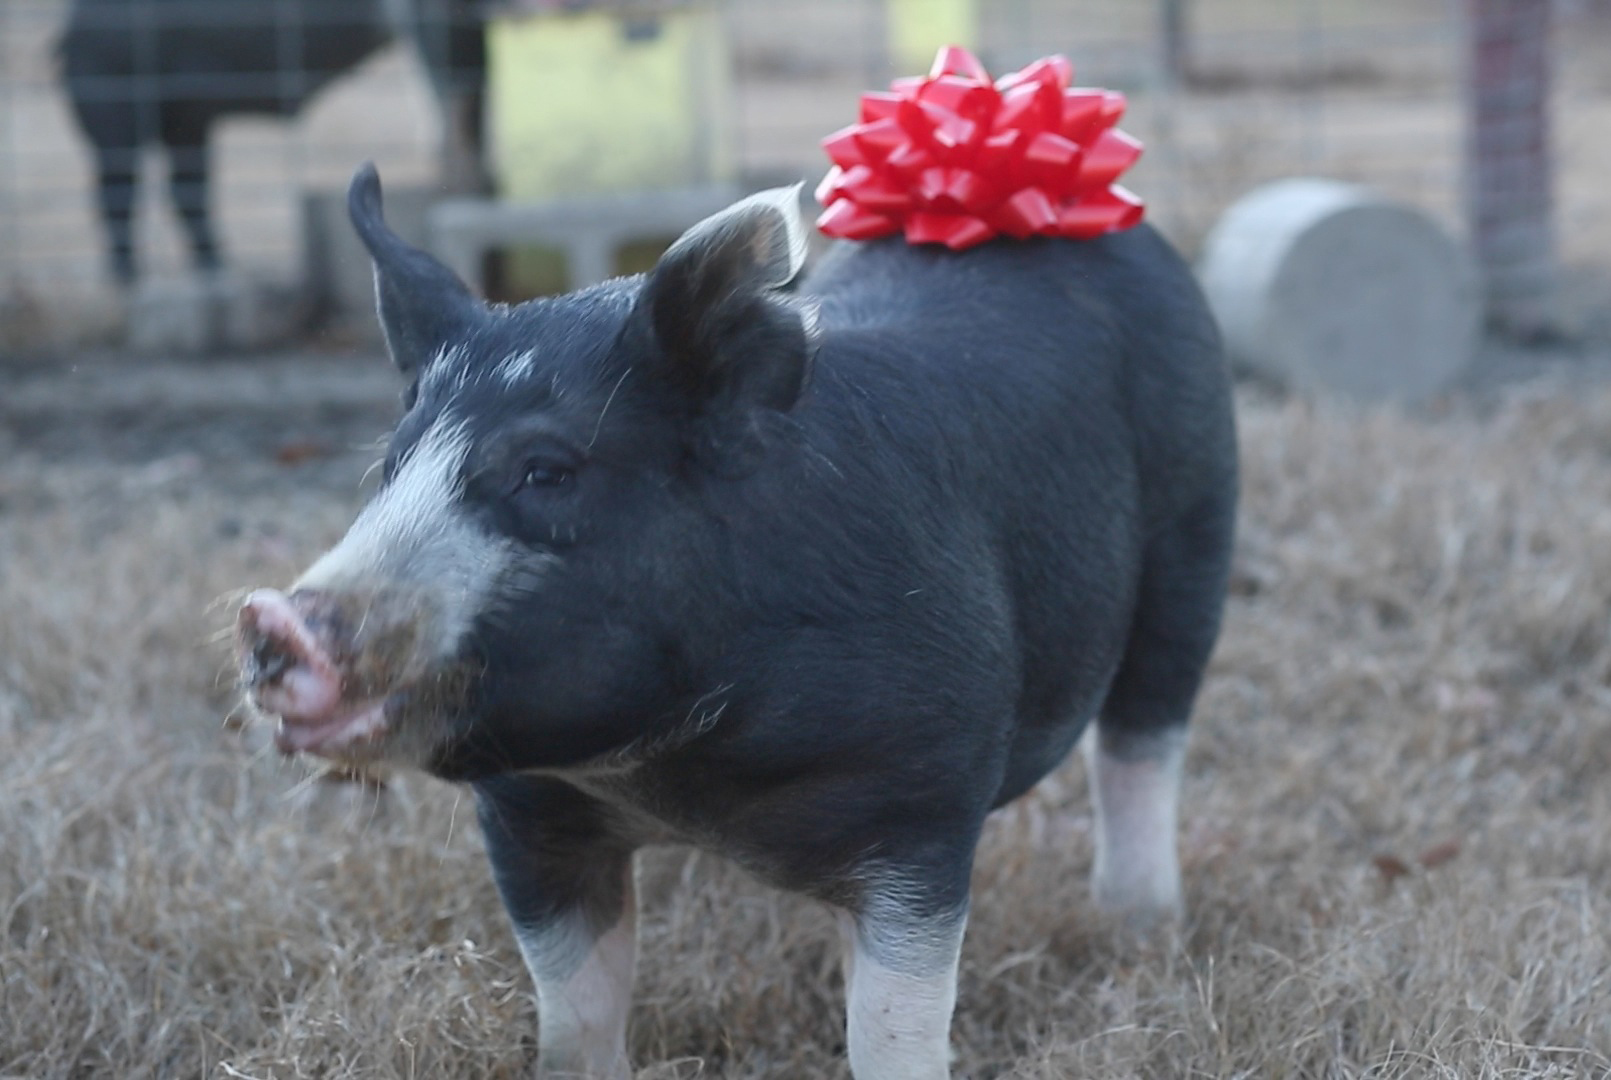 Pig with a bow